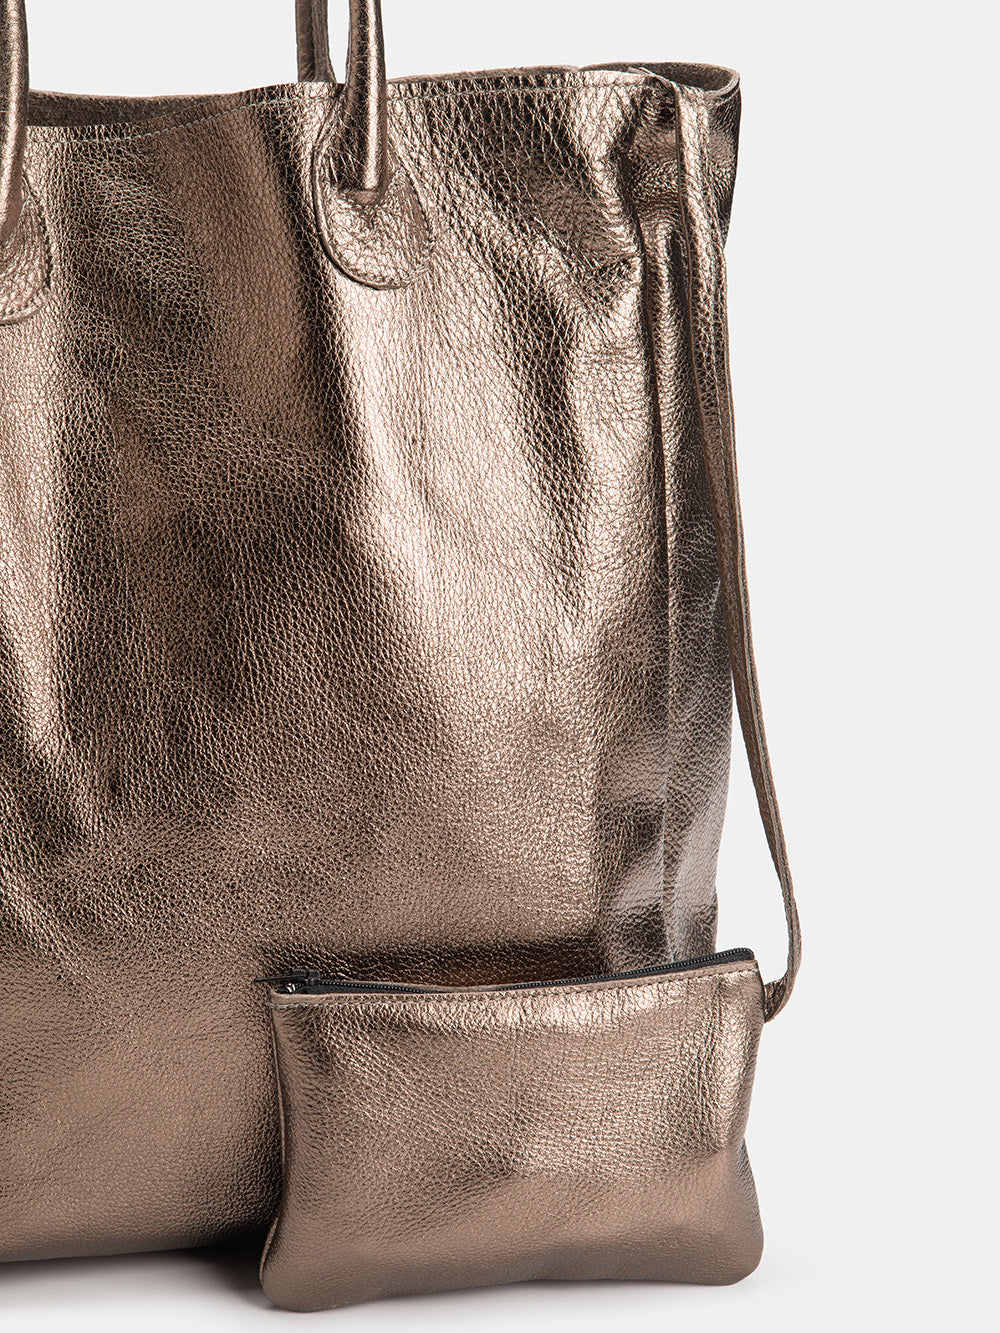 Eve Leather Tote in Bronze